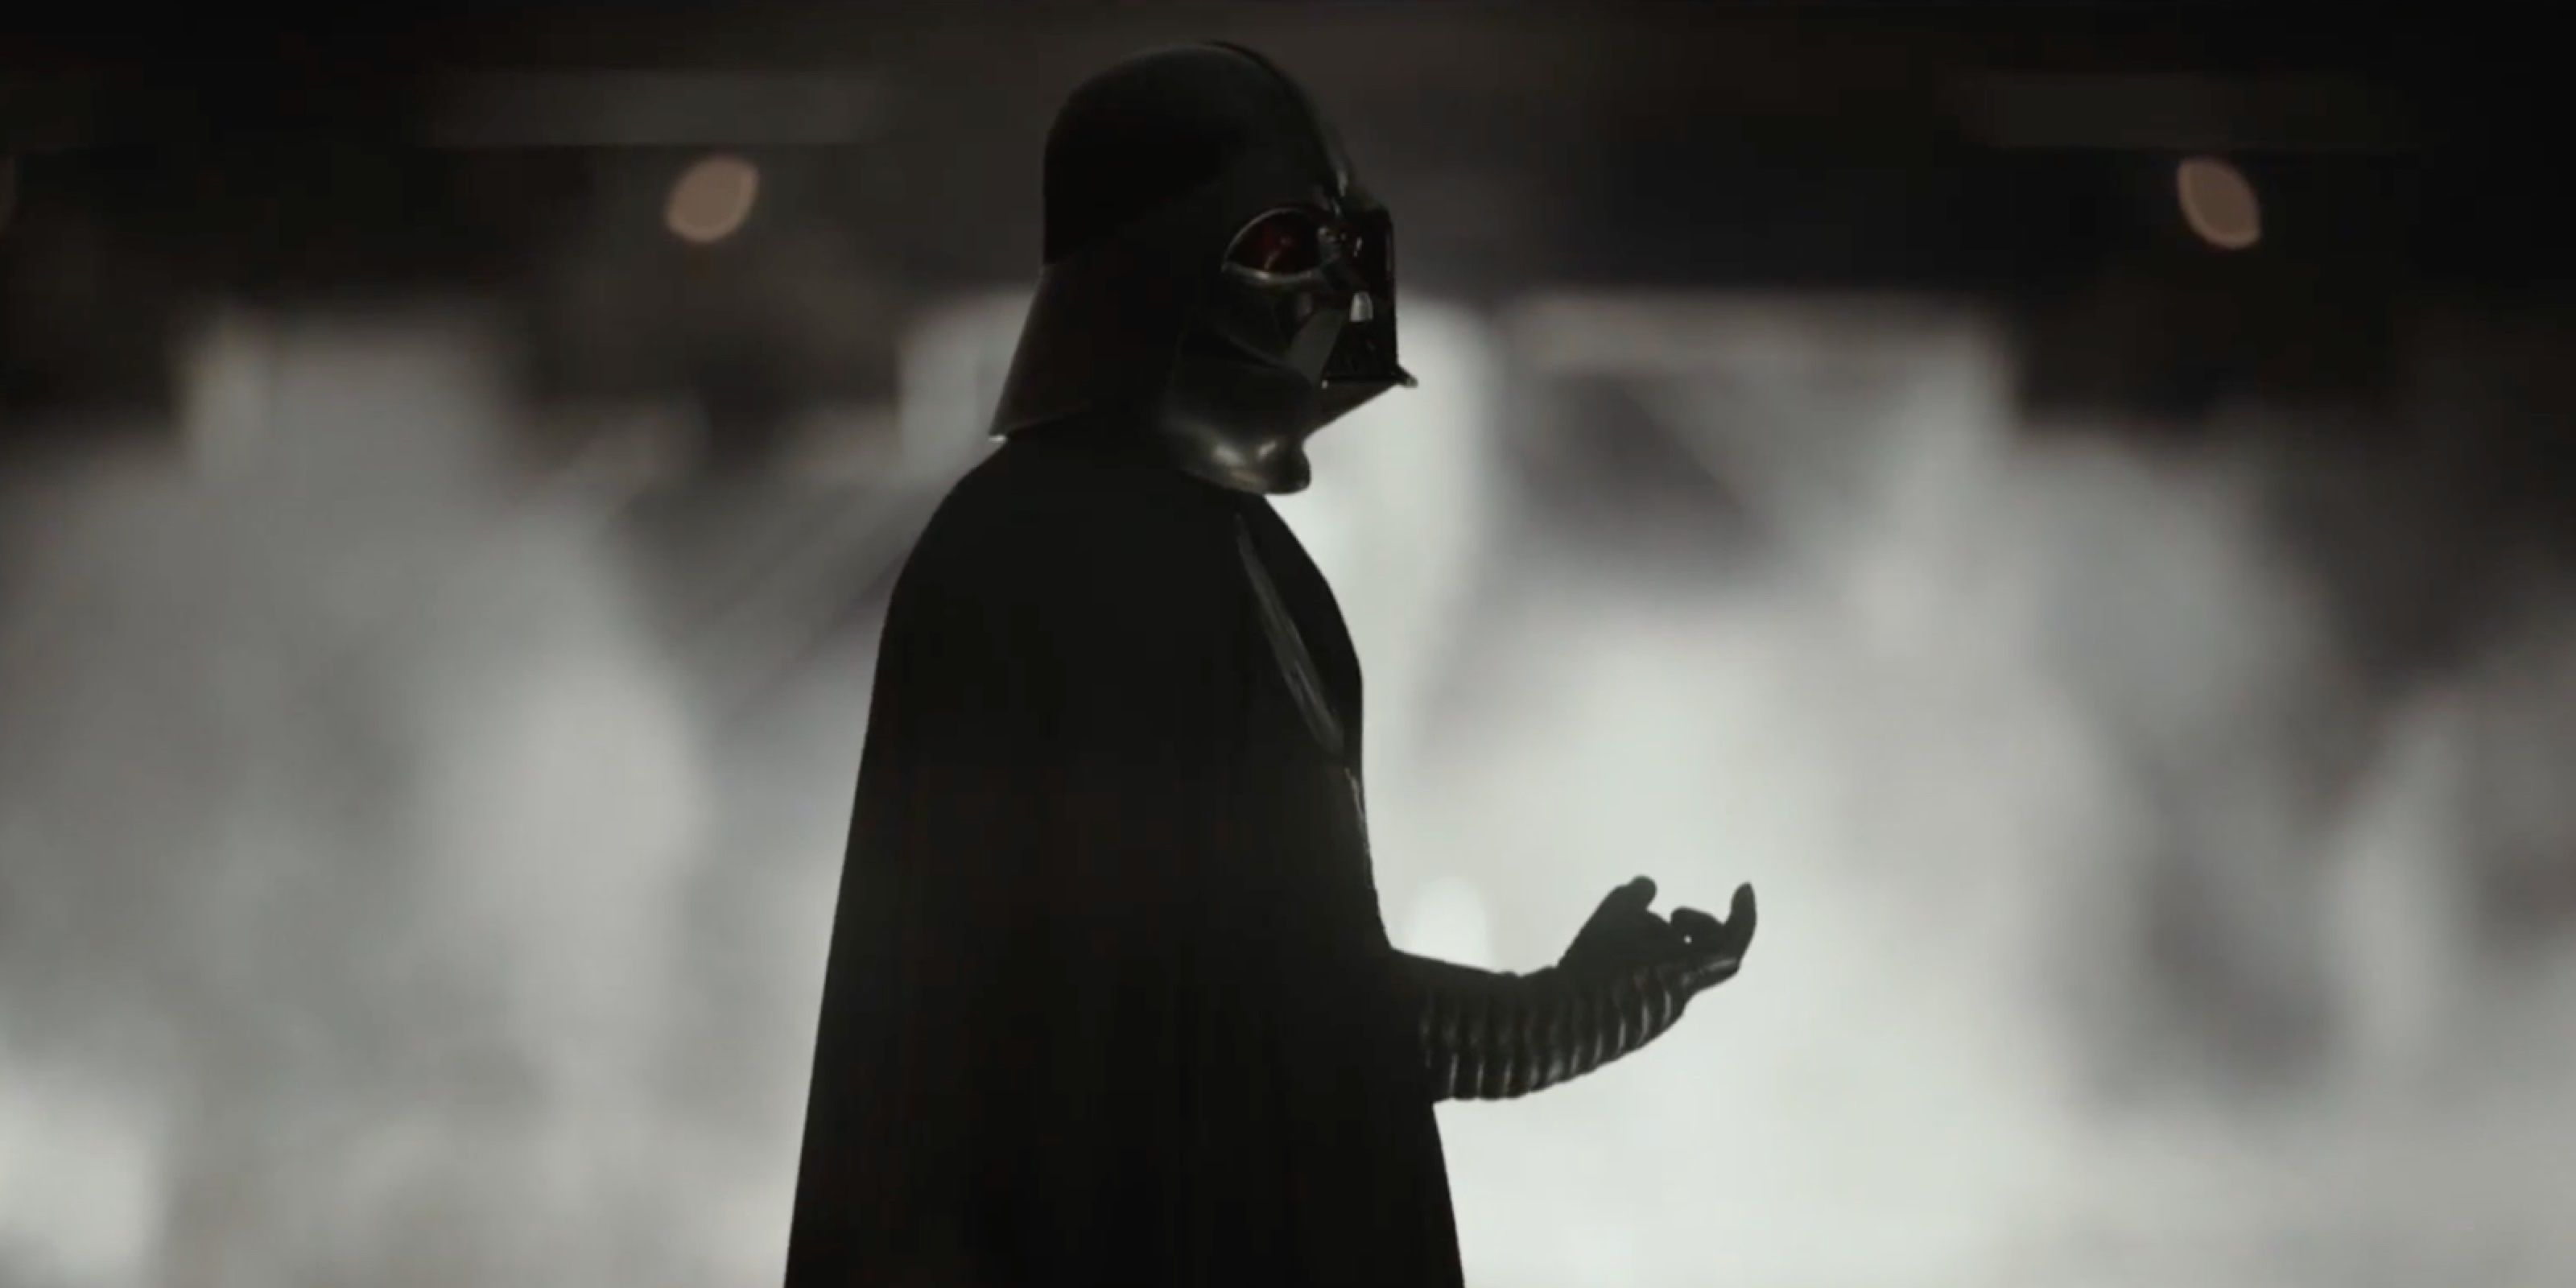 Darth Vader uses the force choke in Rogue One